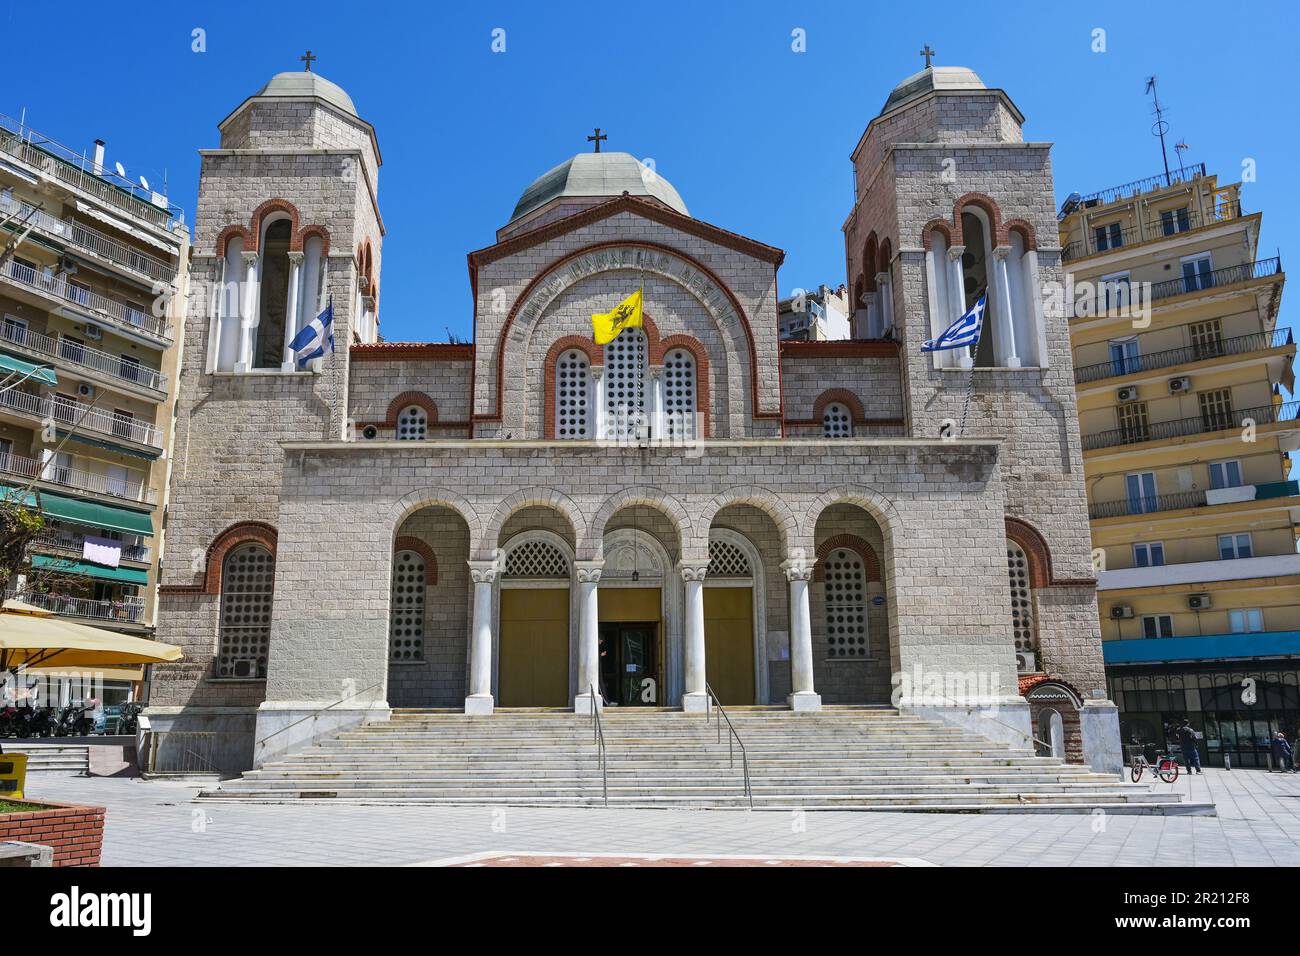 Holy Church of Panagia Dexia (Mother of God) the orthodox church in neo Byzantine style was built in 1956 in the city center of Thessaloniki, Greece, Stock Photo